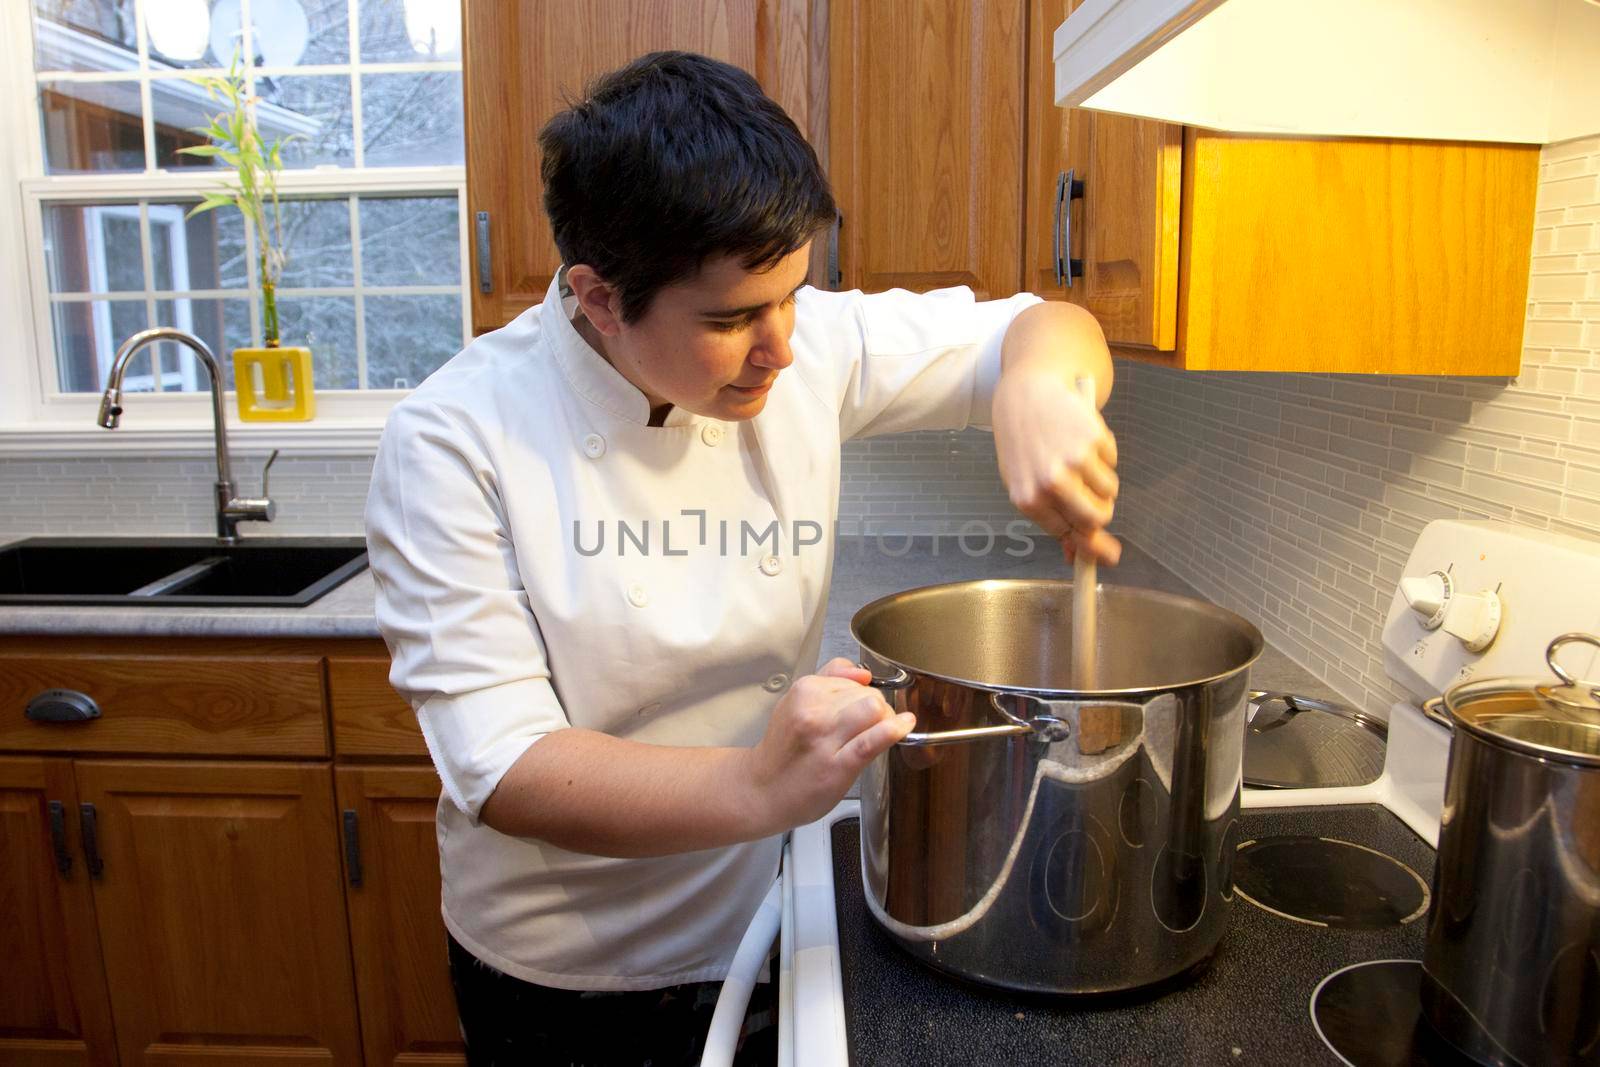  Person in white jacket looks into a huge vat while stirring with a wooden spoon in a beautiful kitchen